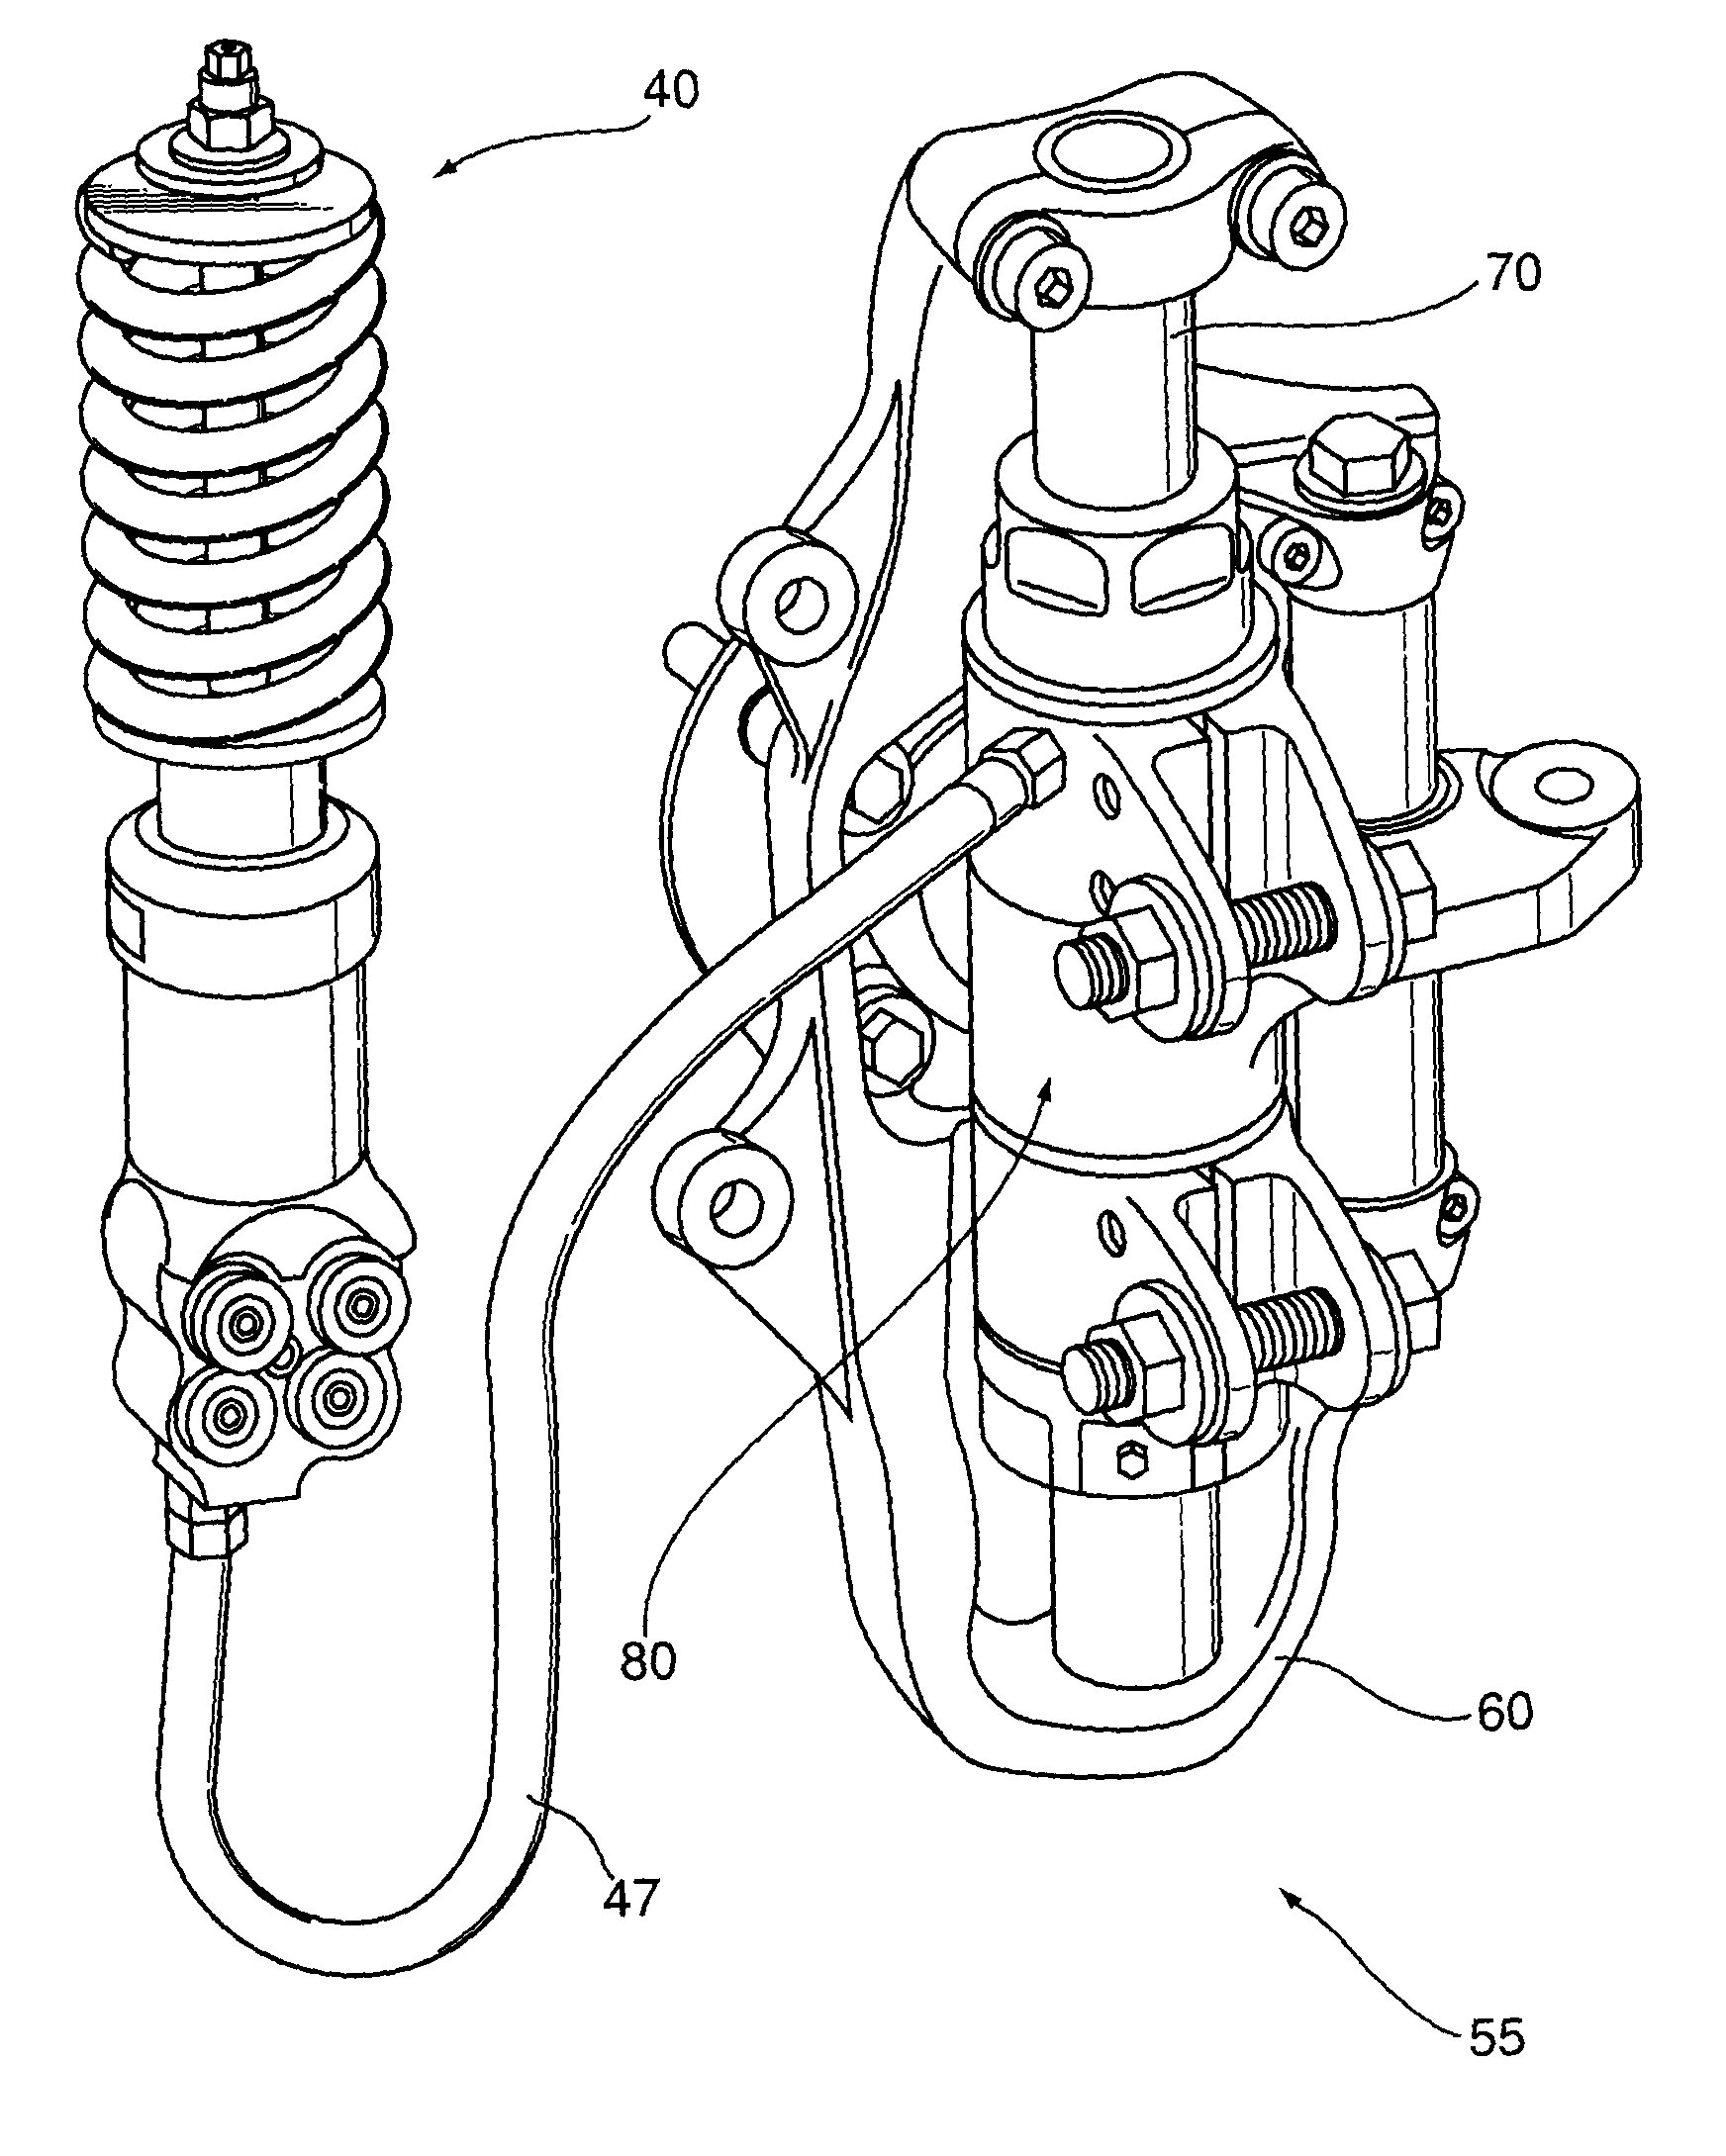 In-wheel suspension system with remote spring and damper means